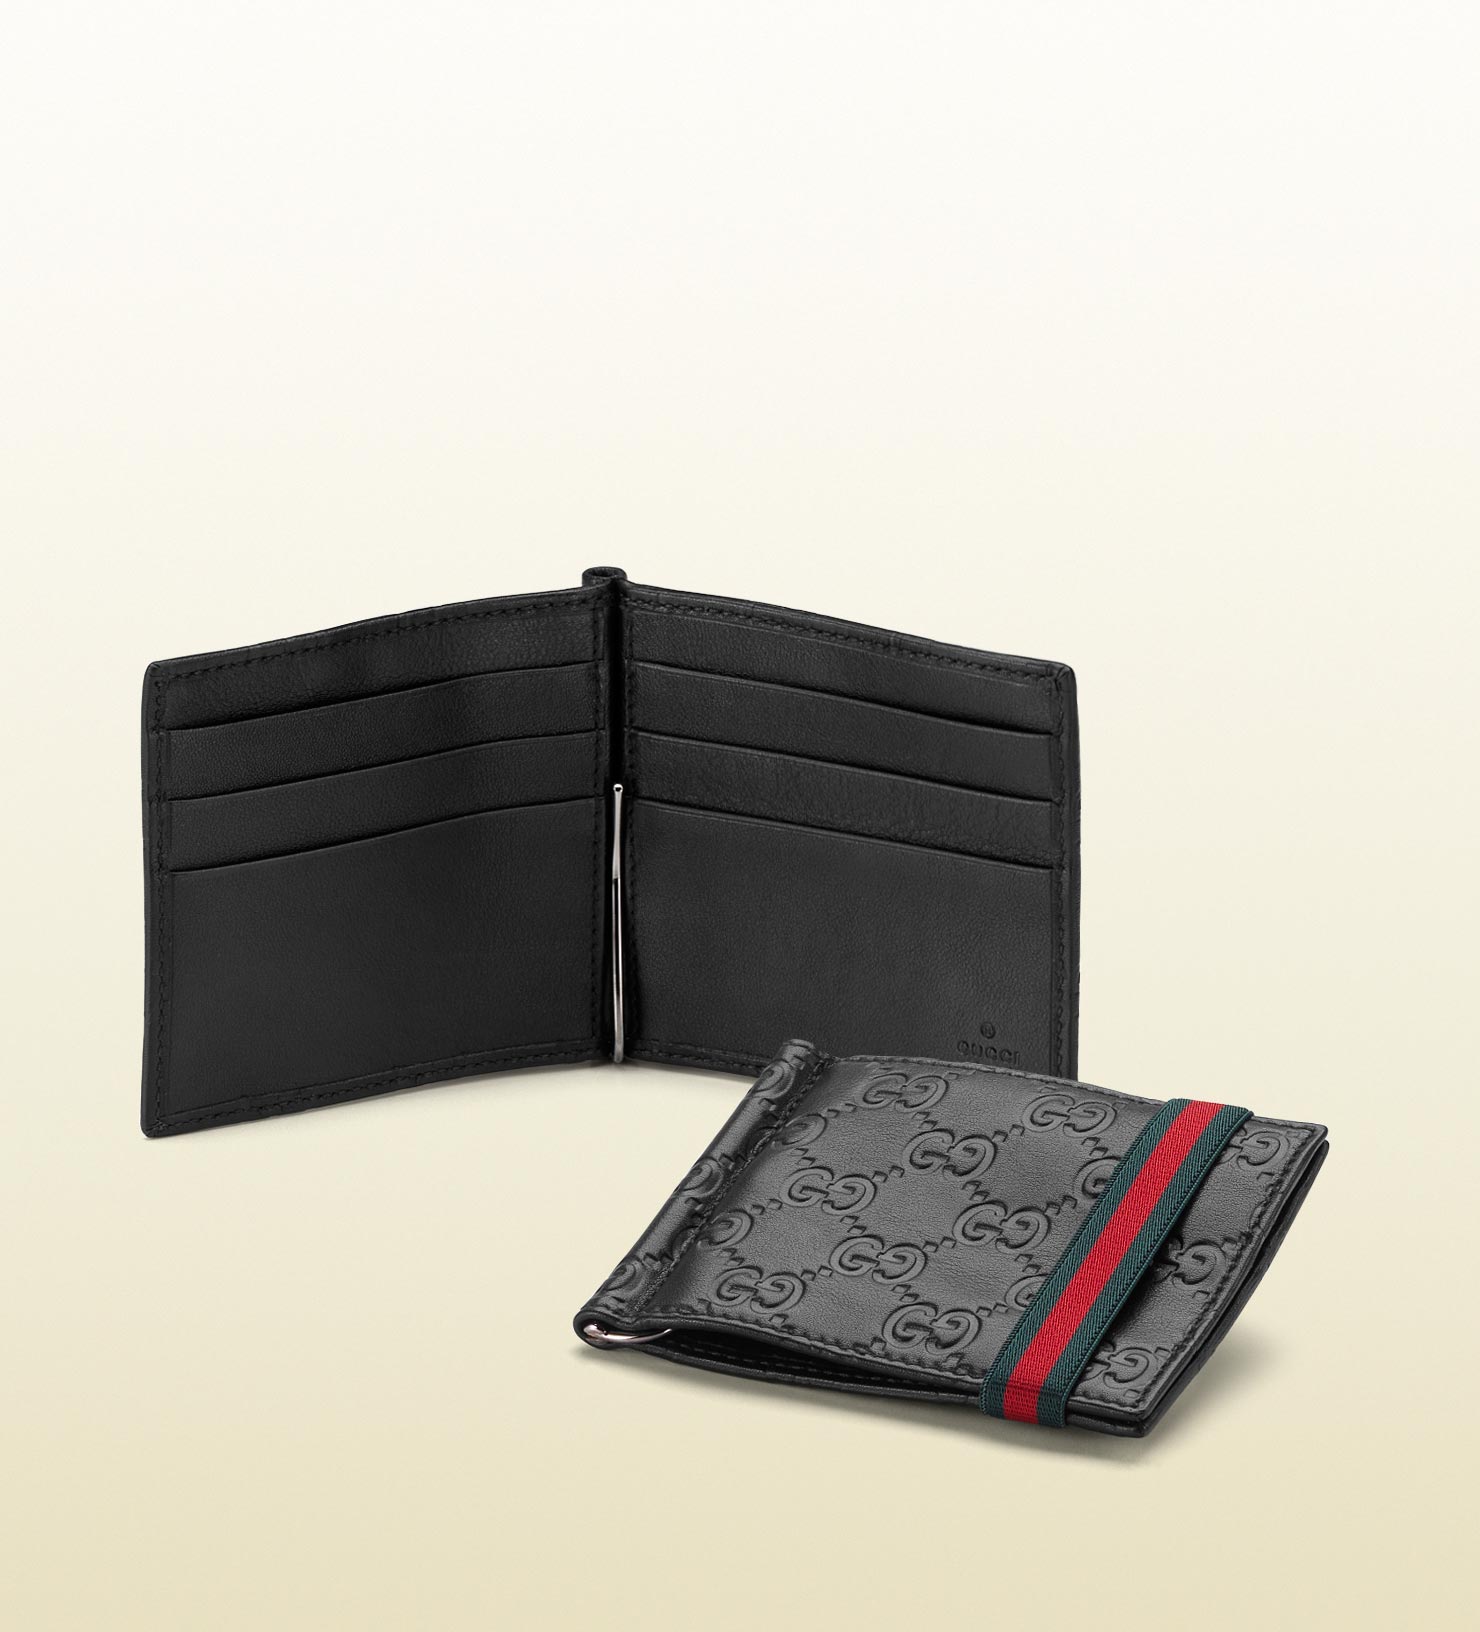 Lyst - Gucci Ssima Leather Money Clip Wallet in Black for Men